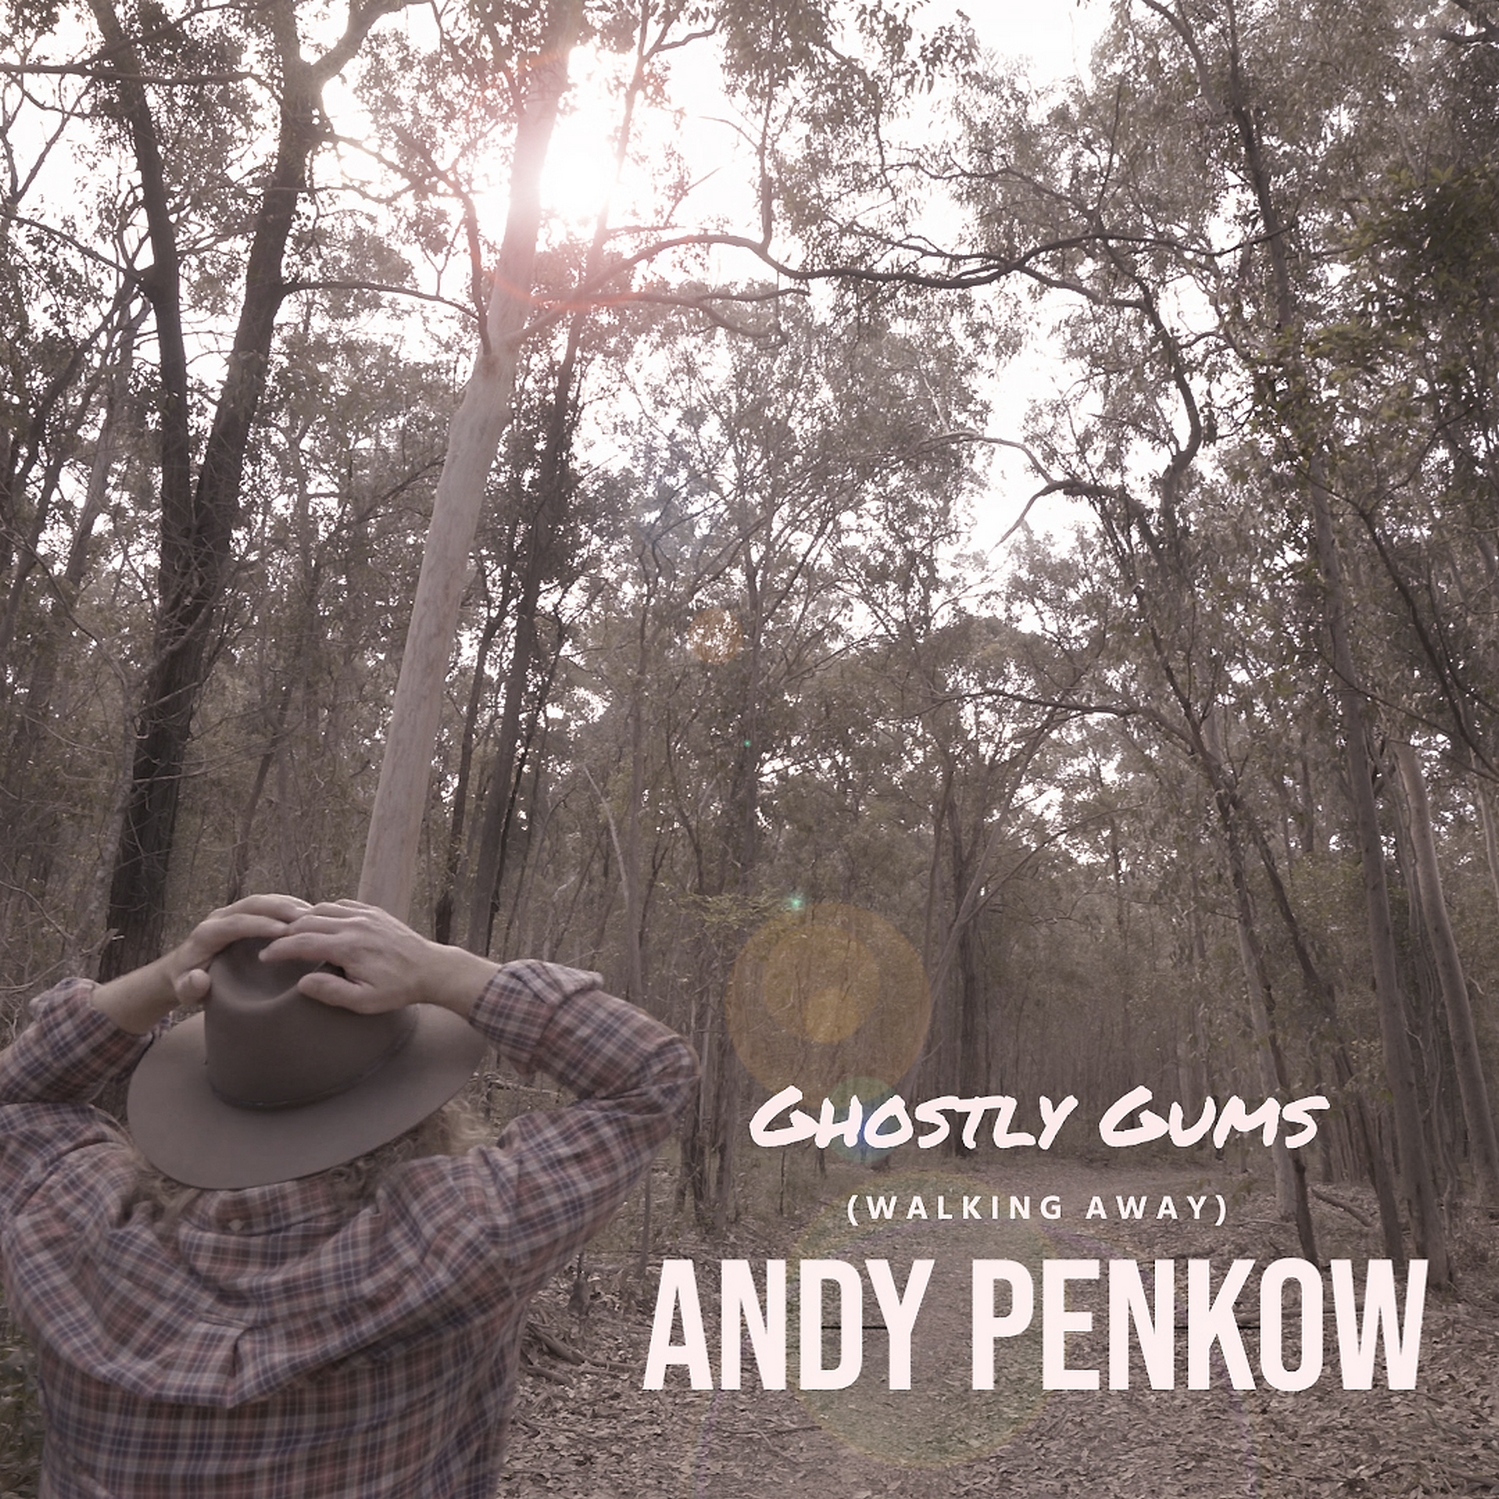 Andy Penkow